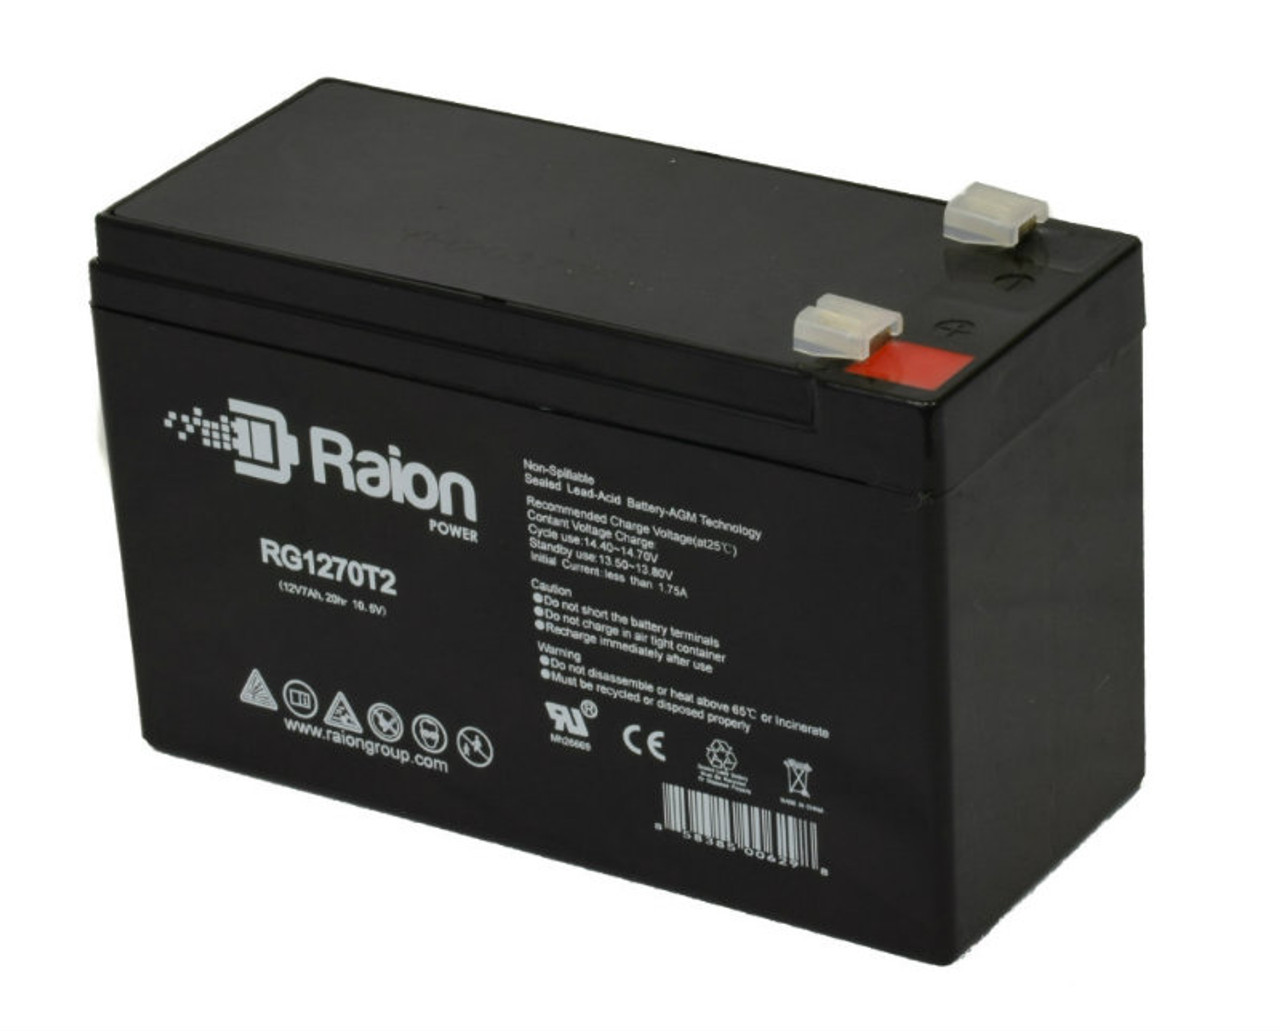 Raion Power RG1270T1 12V 7Ah Non-Spillable Replacement Battery for Alexander G670